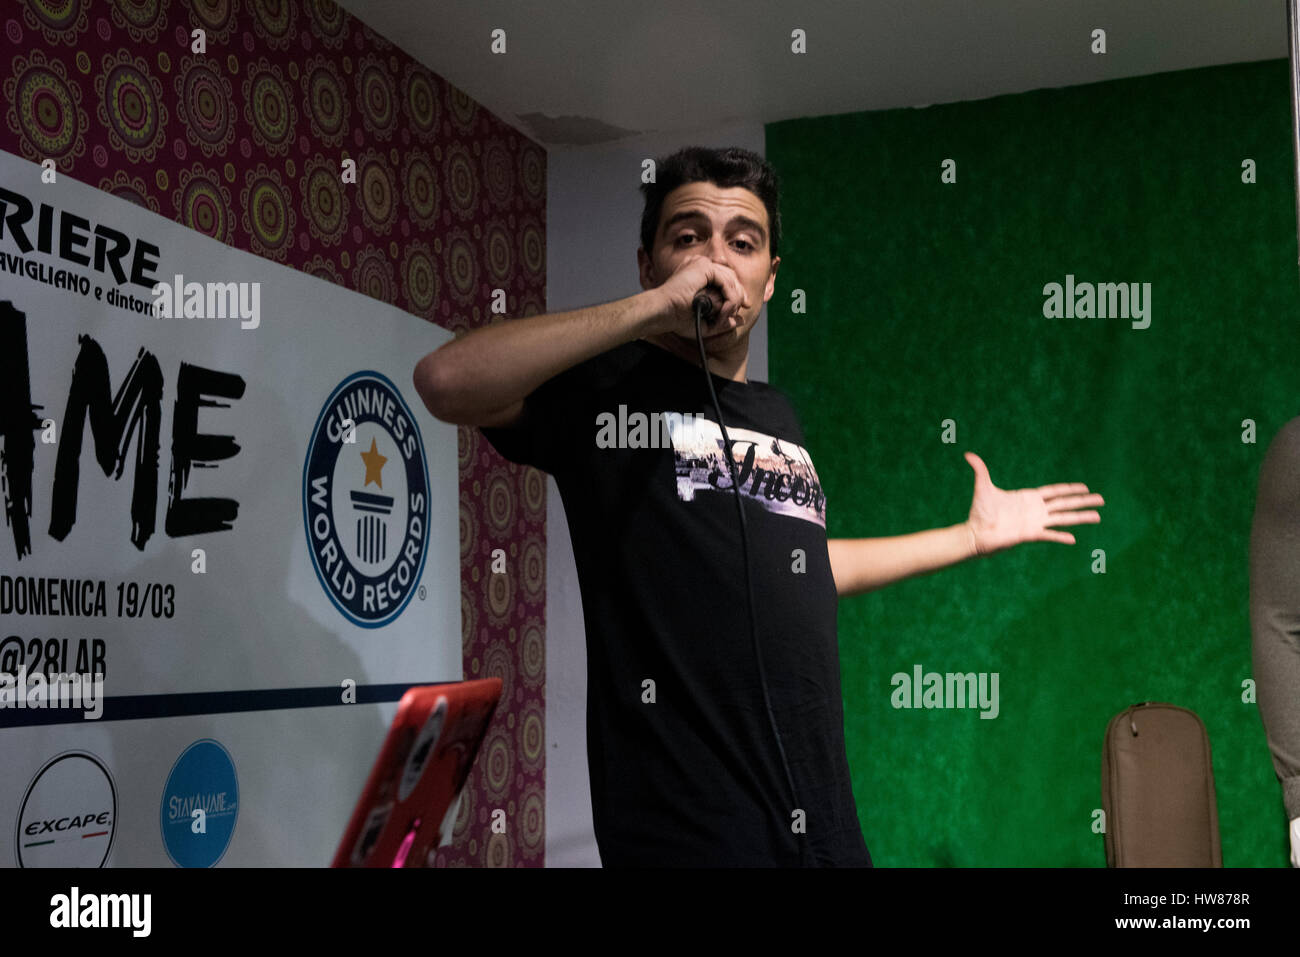 Savigliano, Italy, 18 march 2017. Italian rapper Shame tries to beat the 24 hour freestyle Guinnes world record at 28 lab concept store Credit: Alberto Gandolfo/Alamy Live News Stock Photo